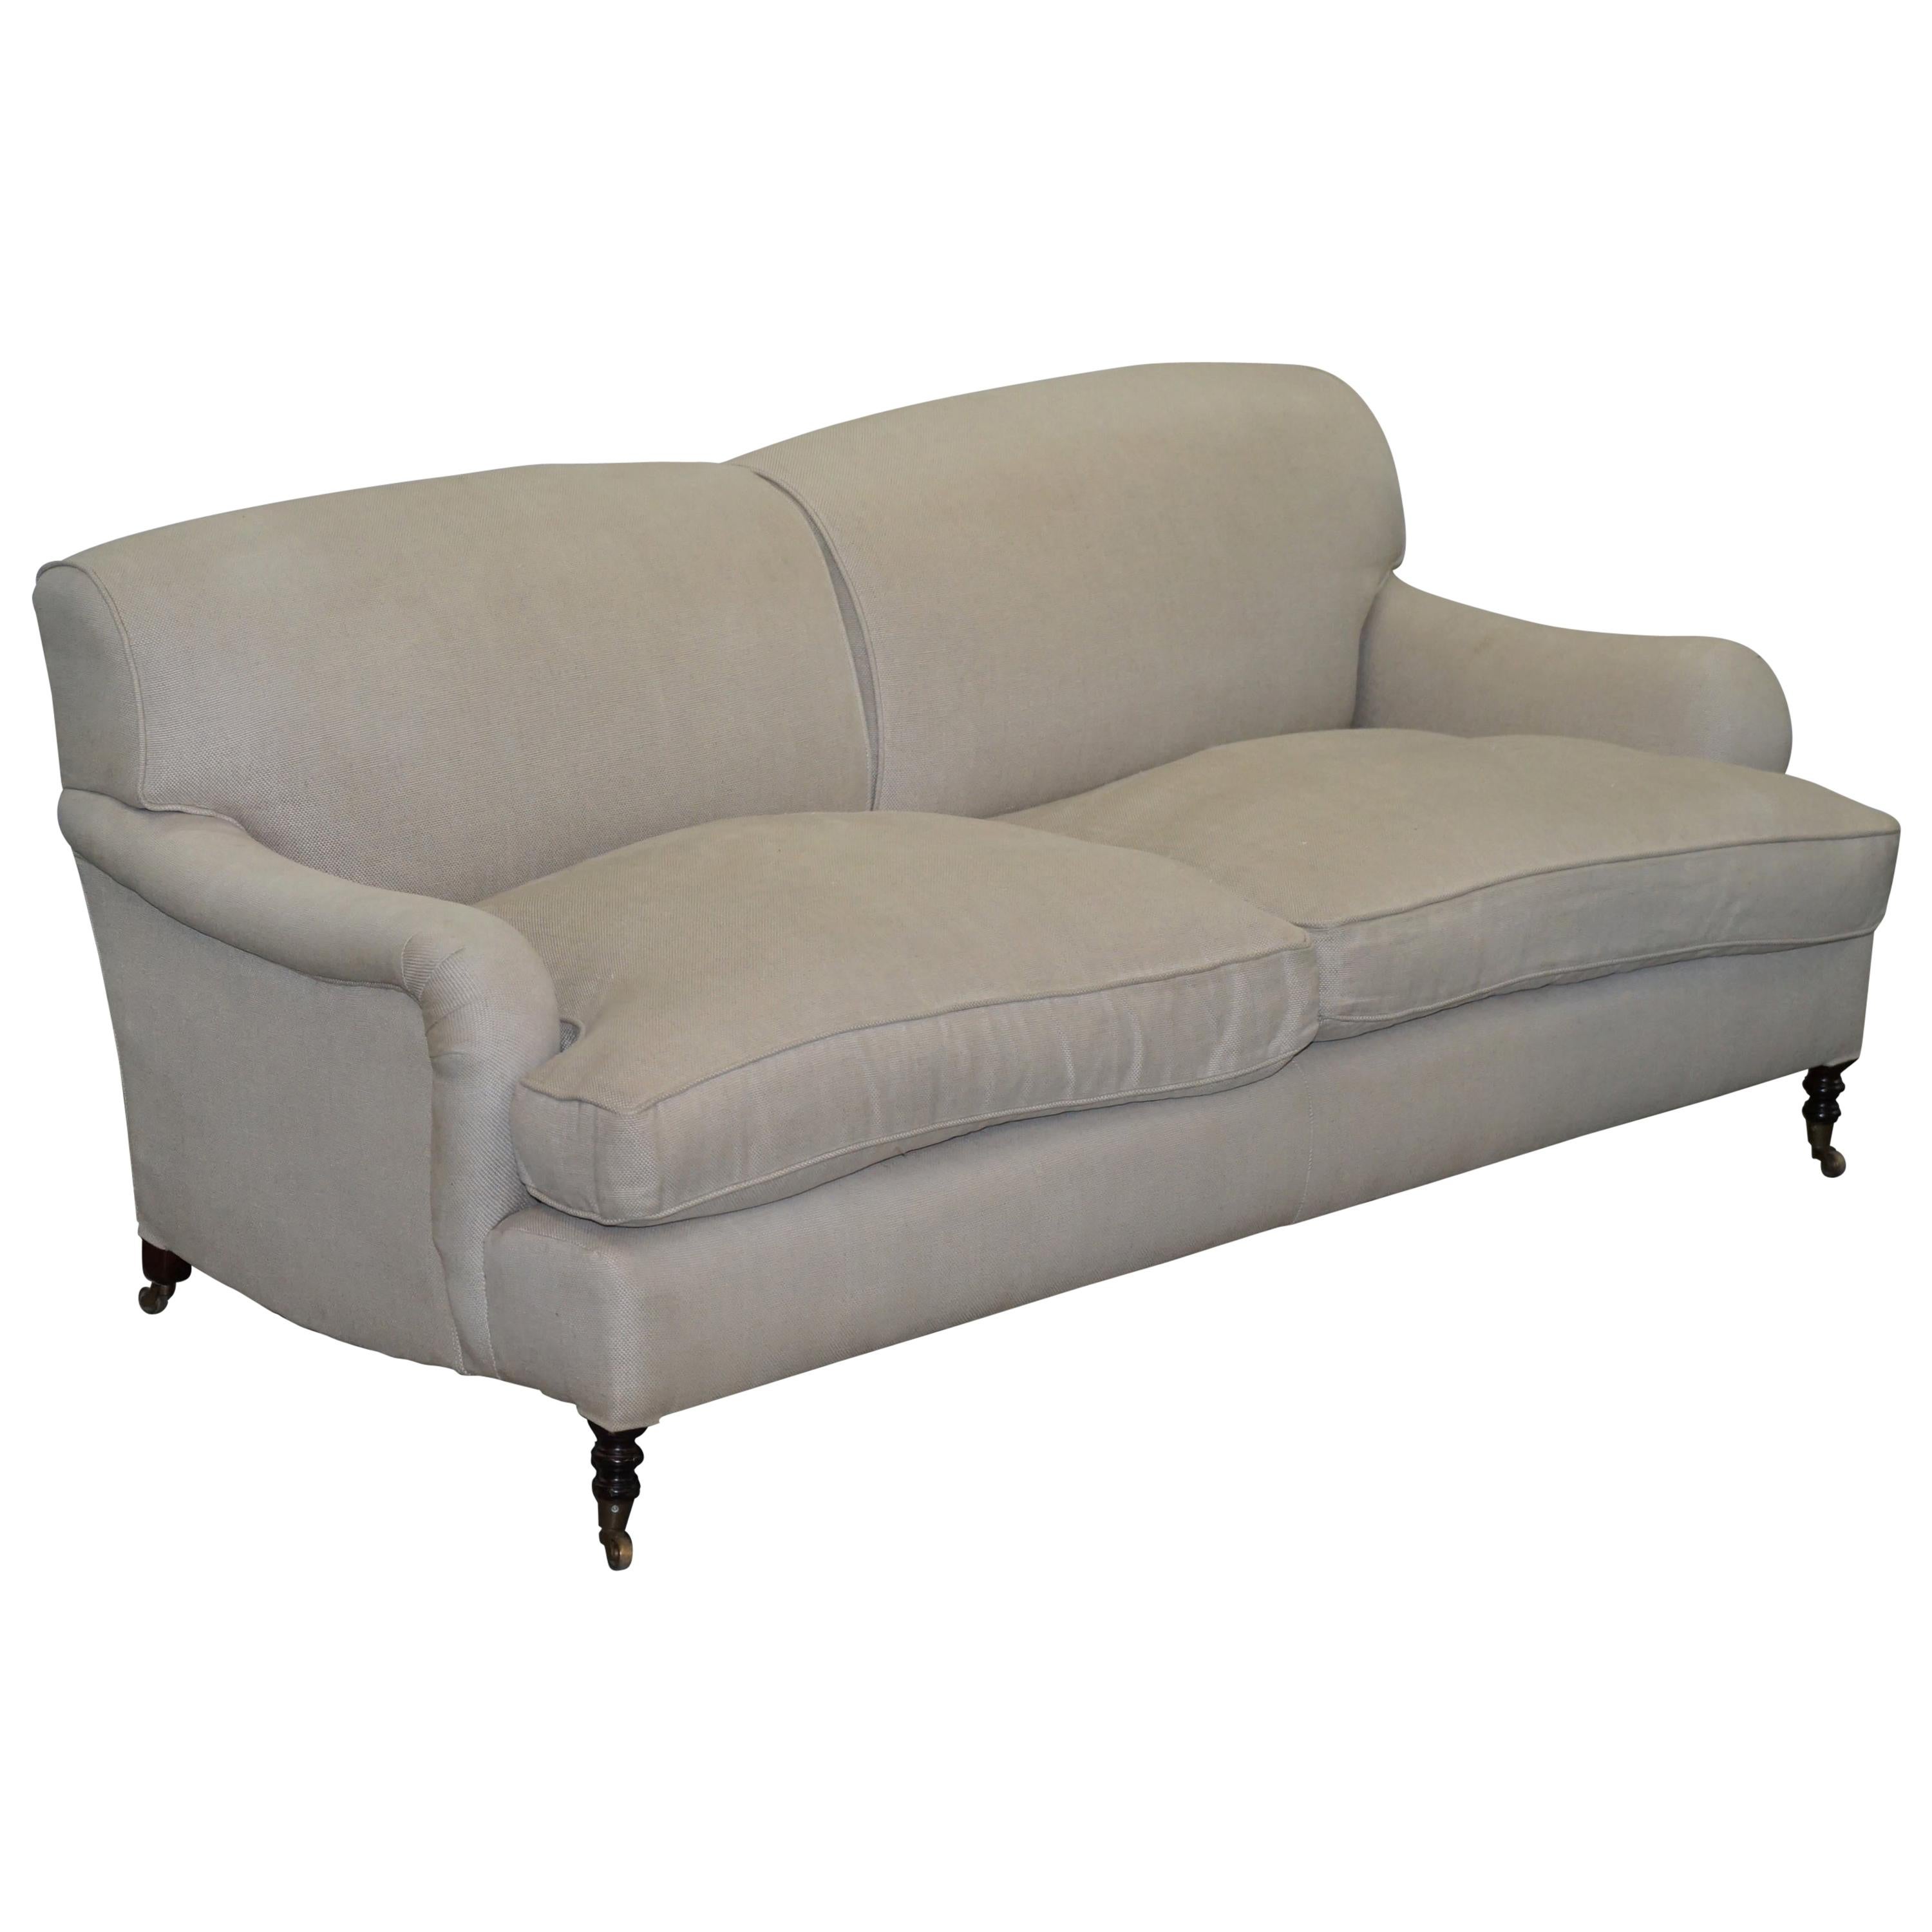 George Smith Signature Scroll Howard Arm Two, Three Seater Sofa Grey